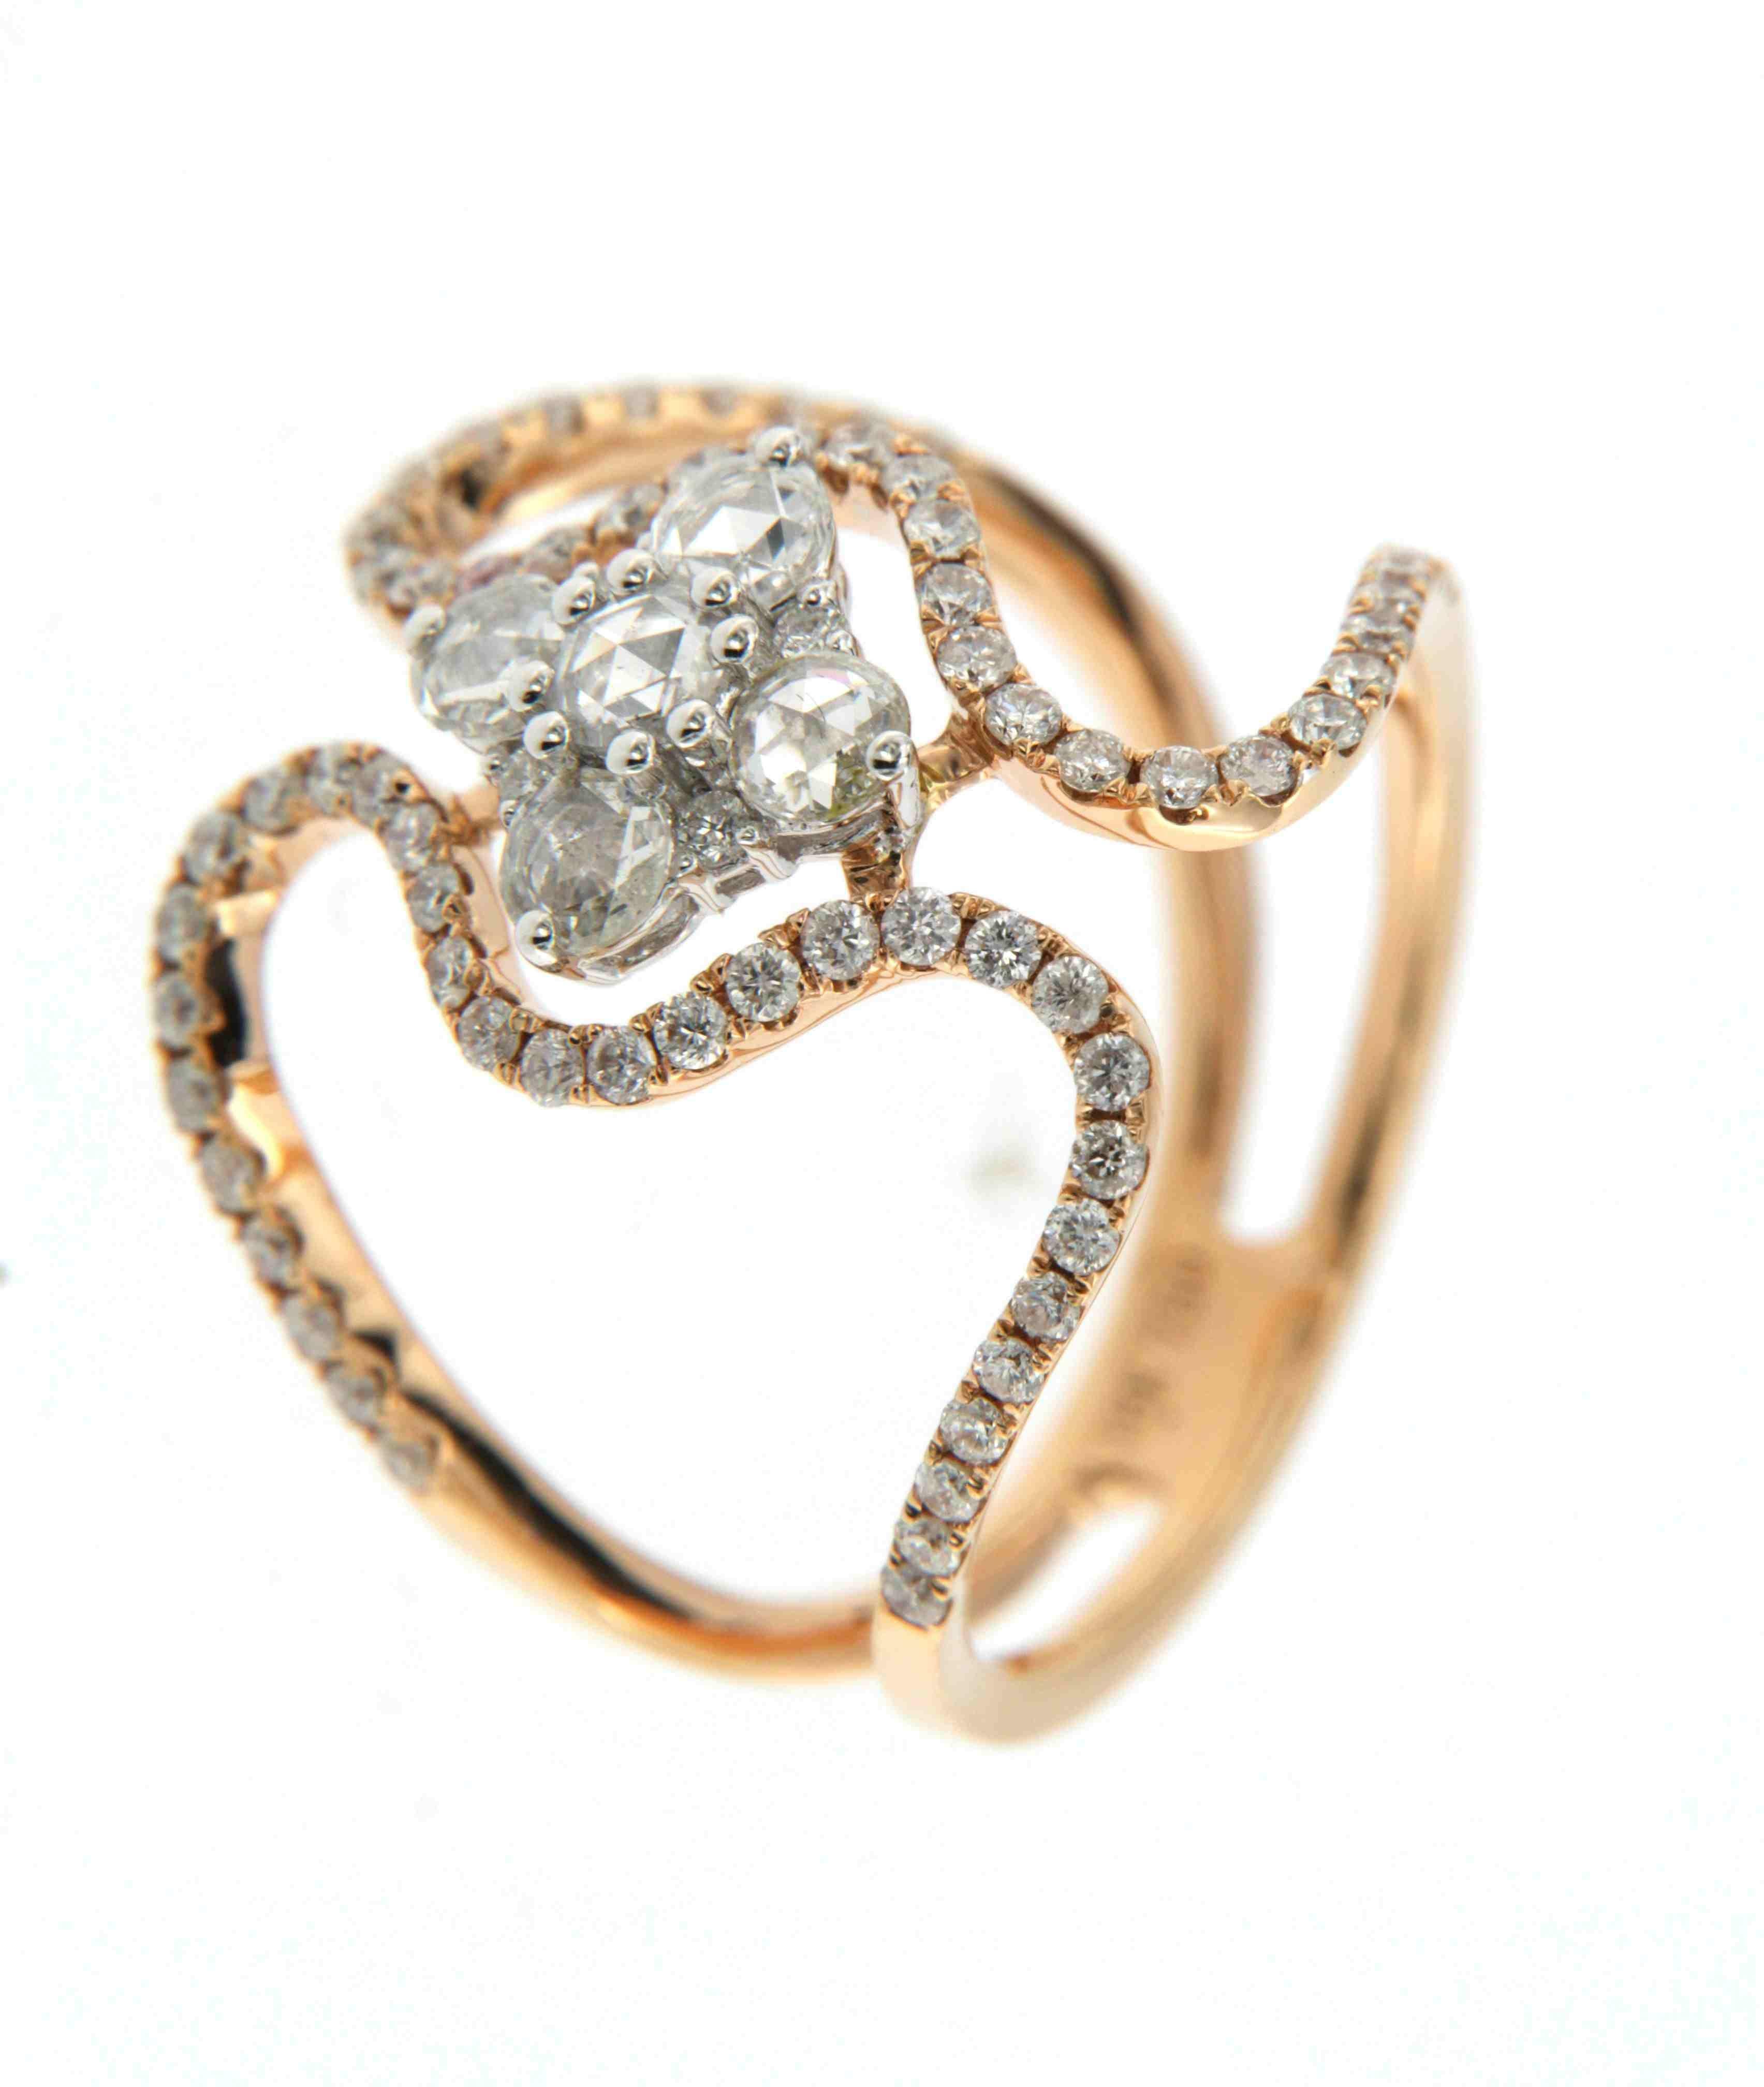 This remarkable ring is a beautifully orchestrated piece in 18K rose gold, featuring an intricate design that exudes both vintage charm and contemporary elegance. The ring spotlights five round rose-cut diamonds at its center, which together total